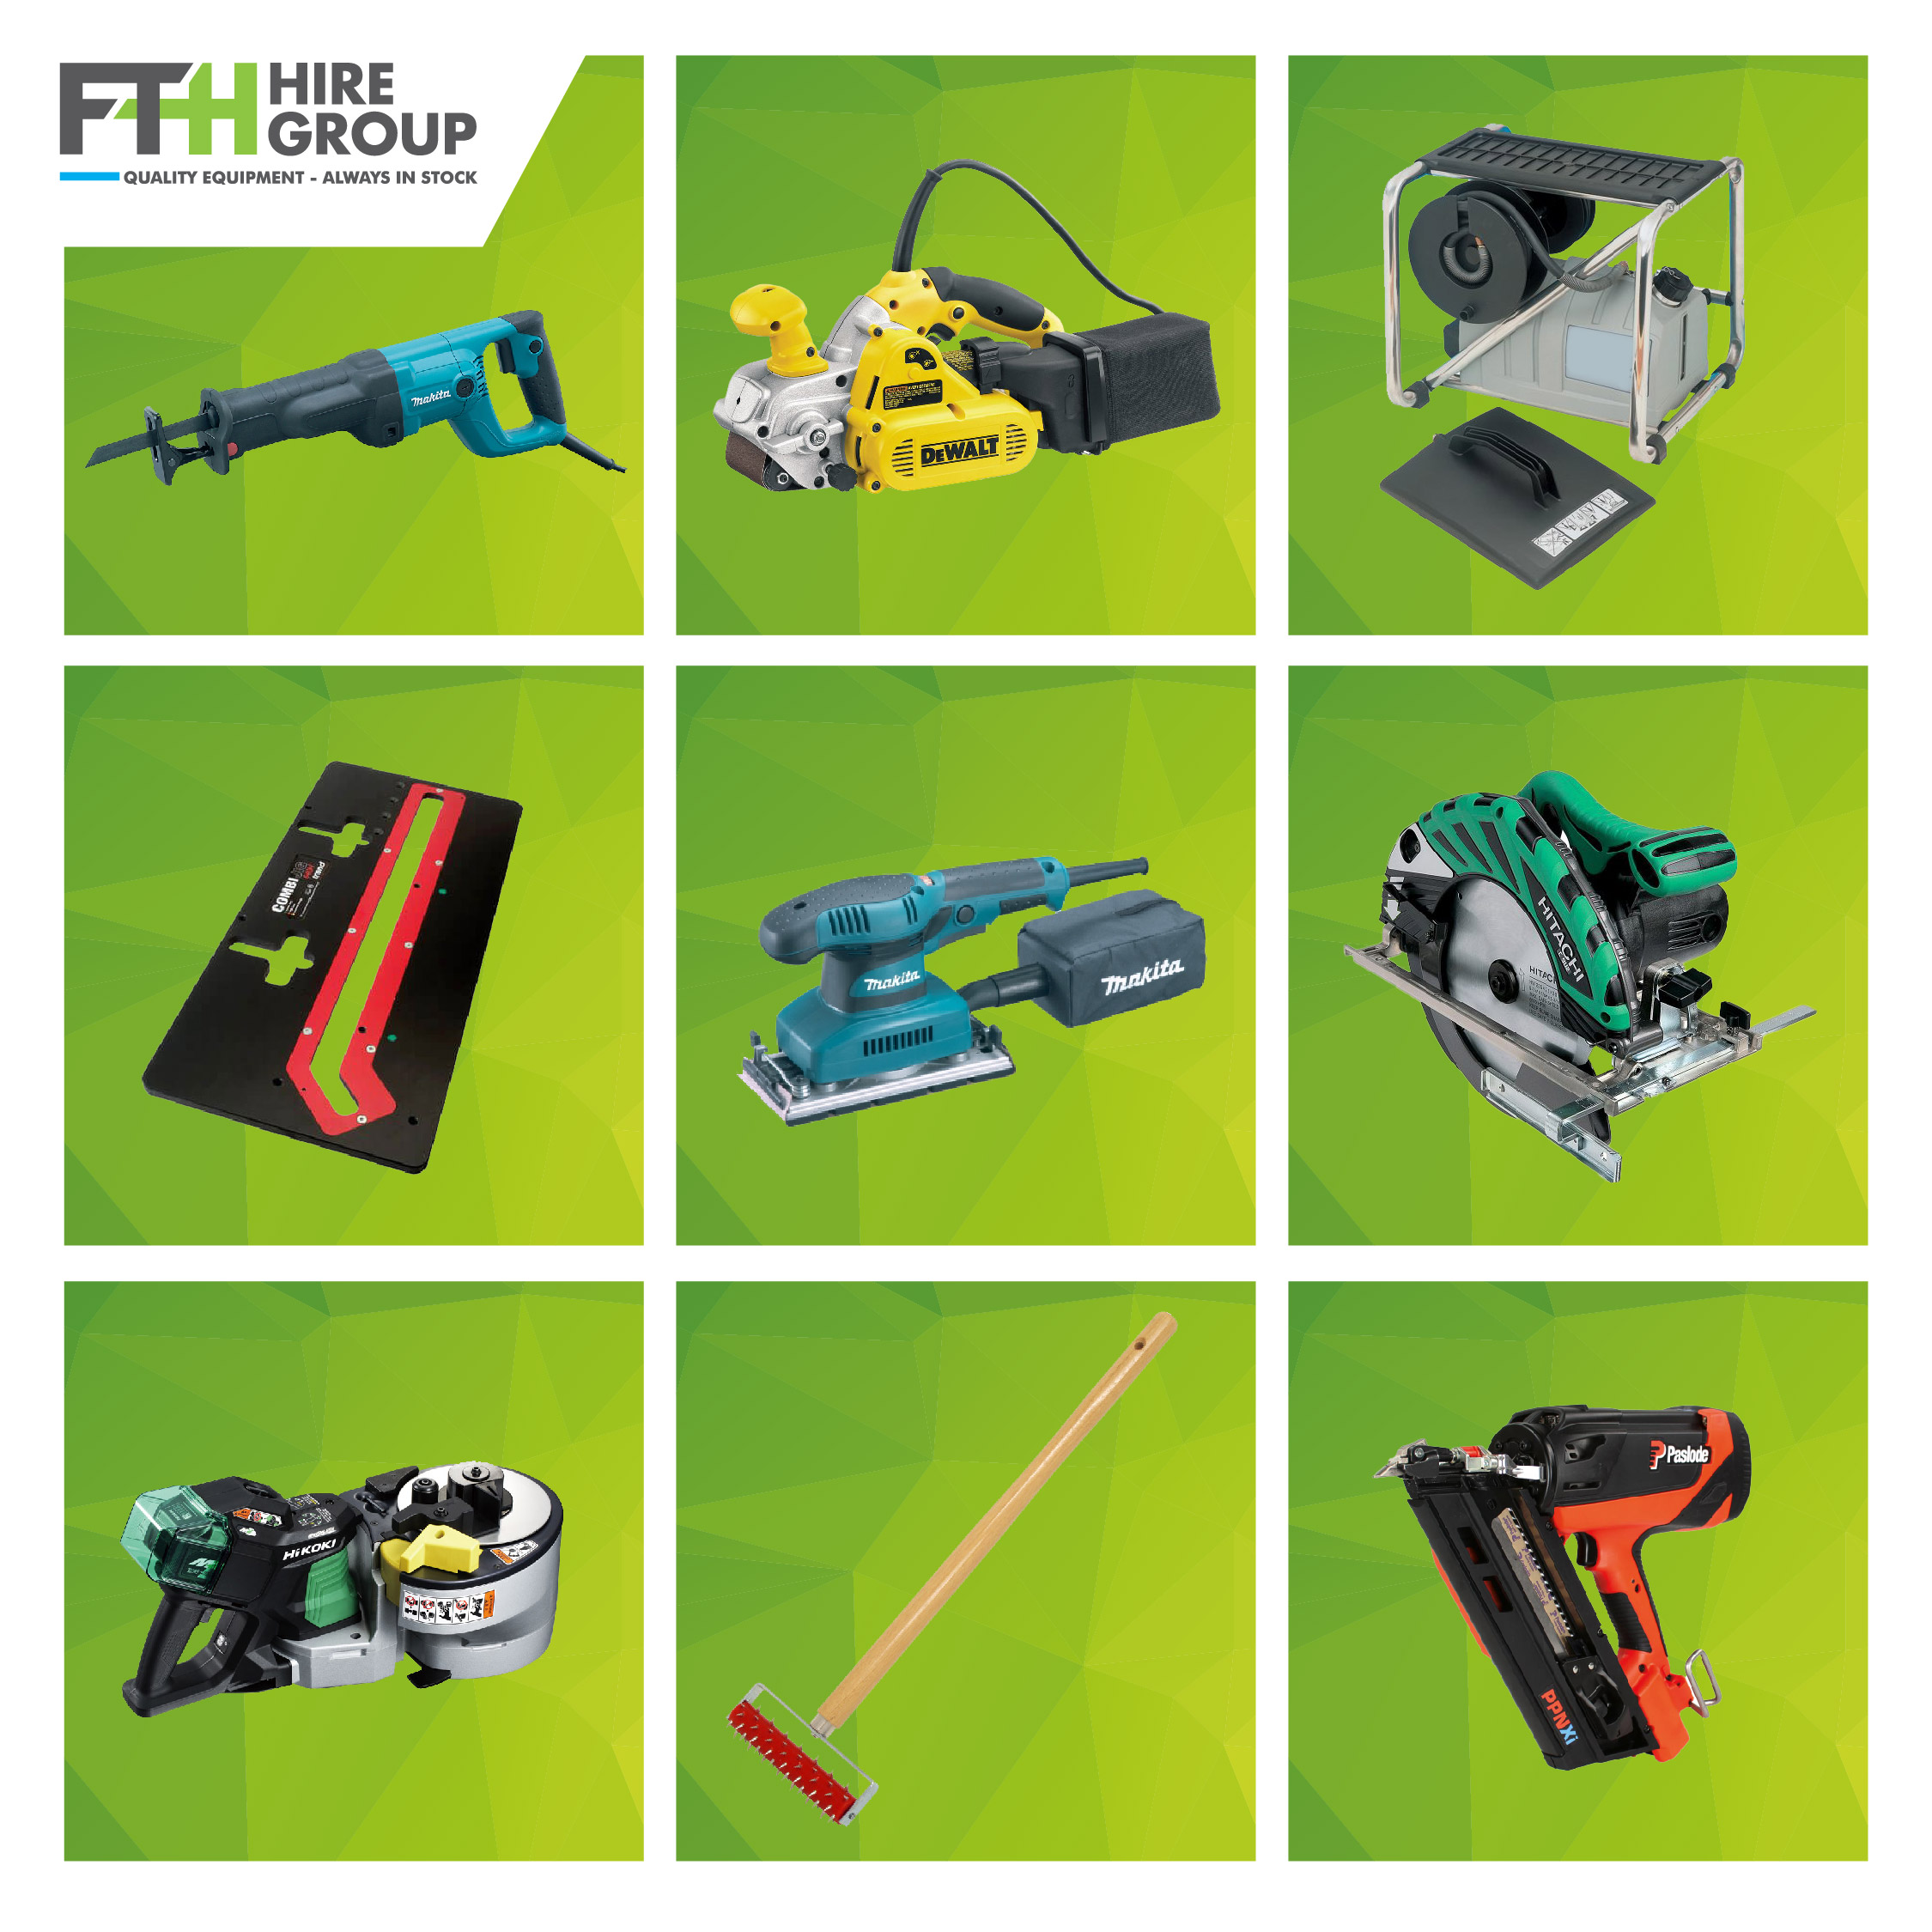 Our Range of Tools & Equipment from FTH Hire Group